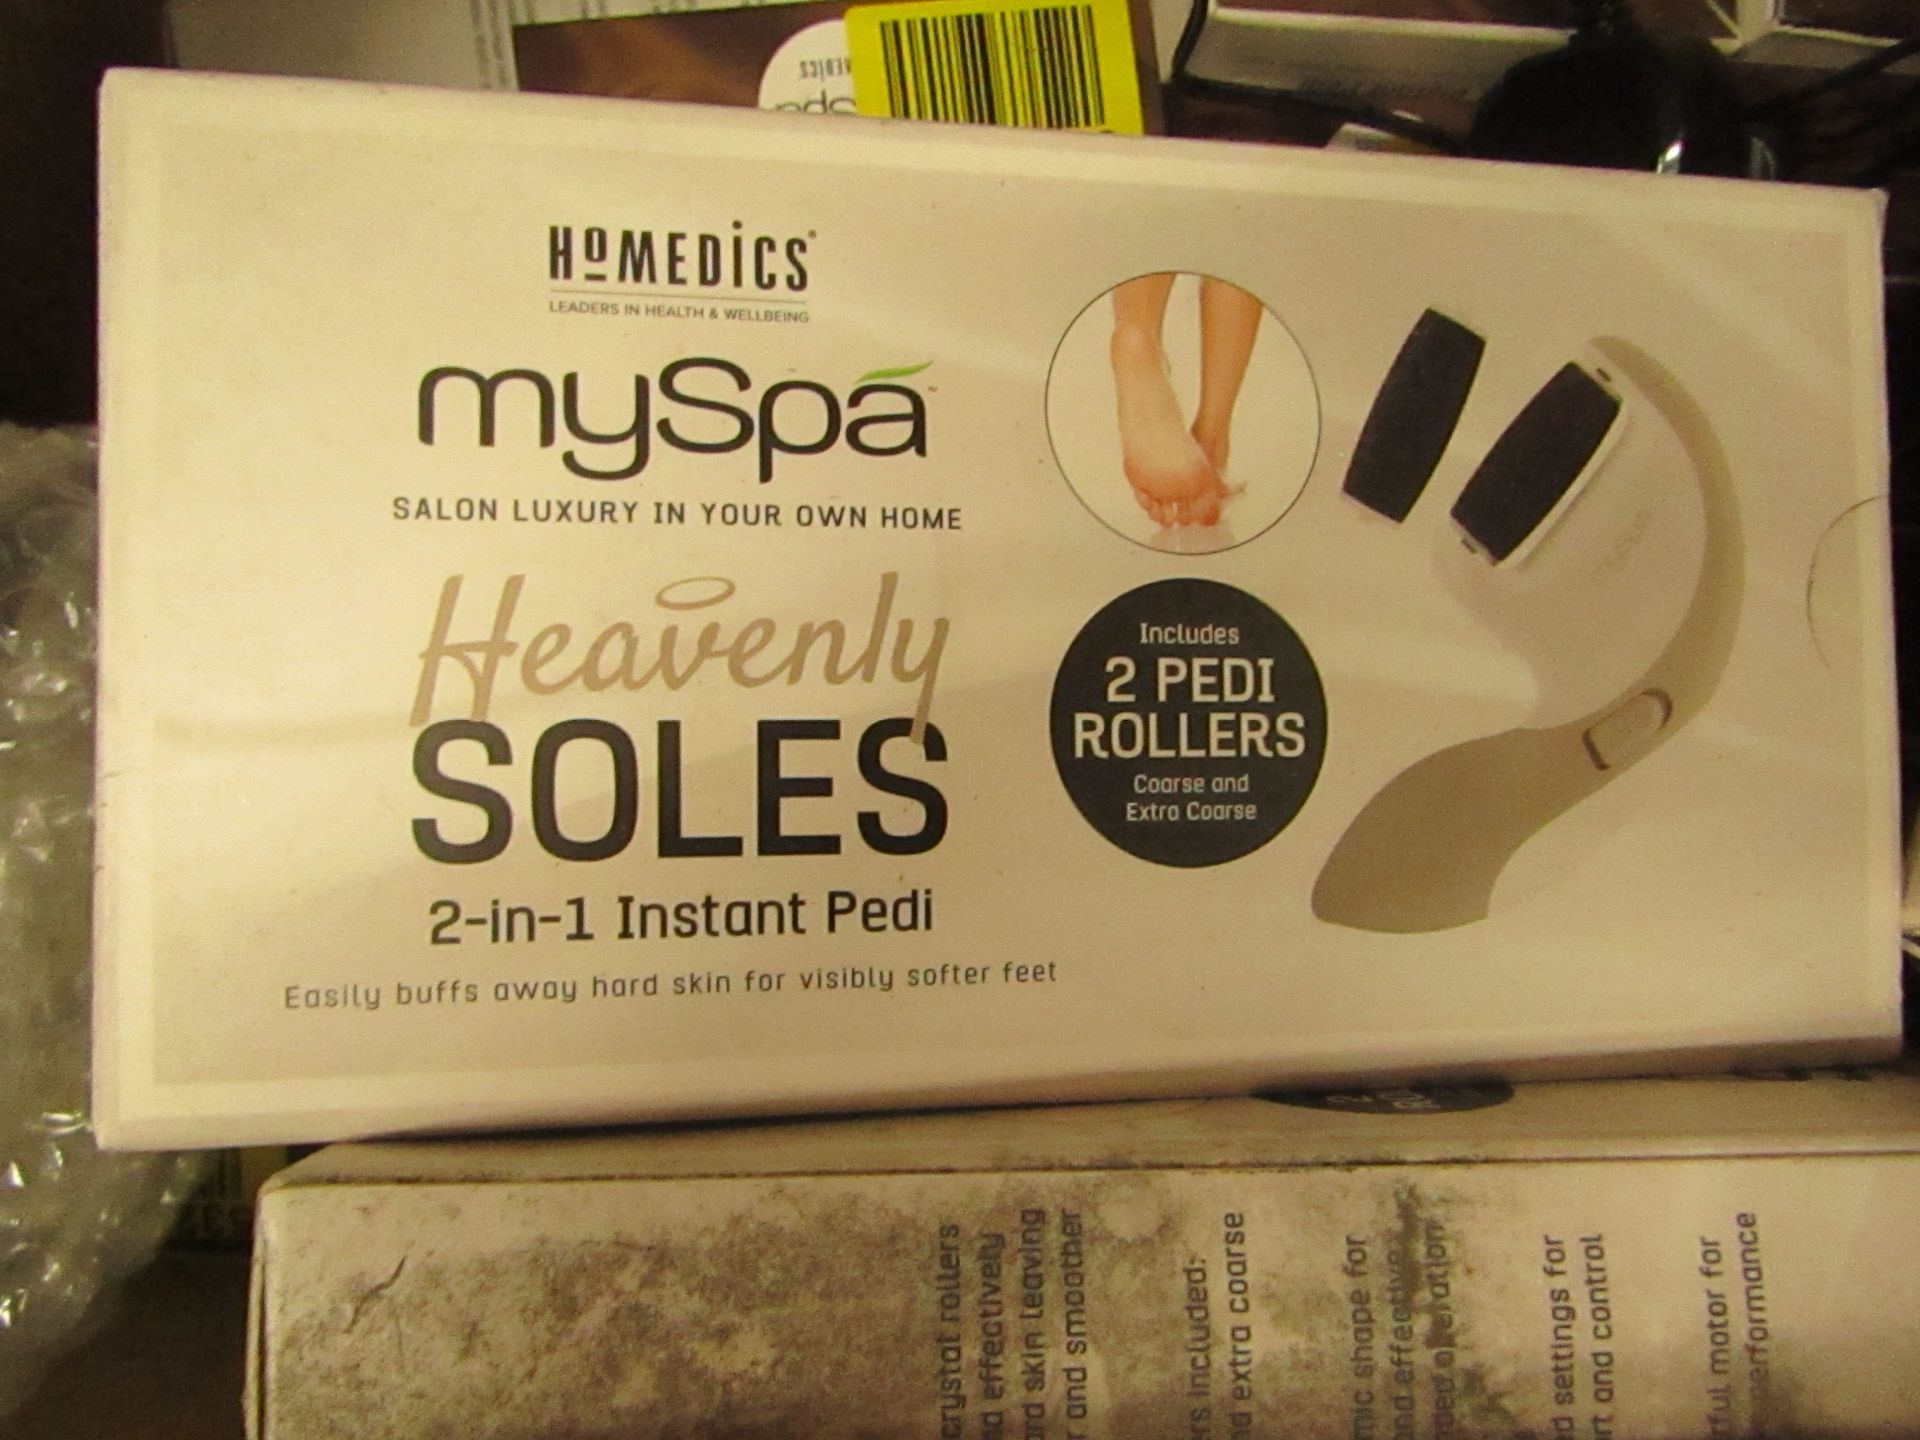 4x Home medics My Spa Heavenly Soles 2 in 1 instant Pedi, includes 2 pedi rollers, new and boxed